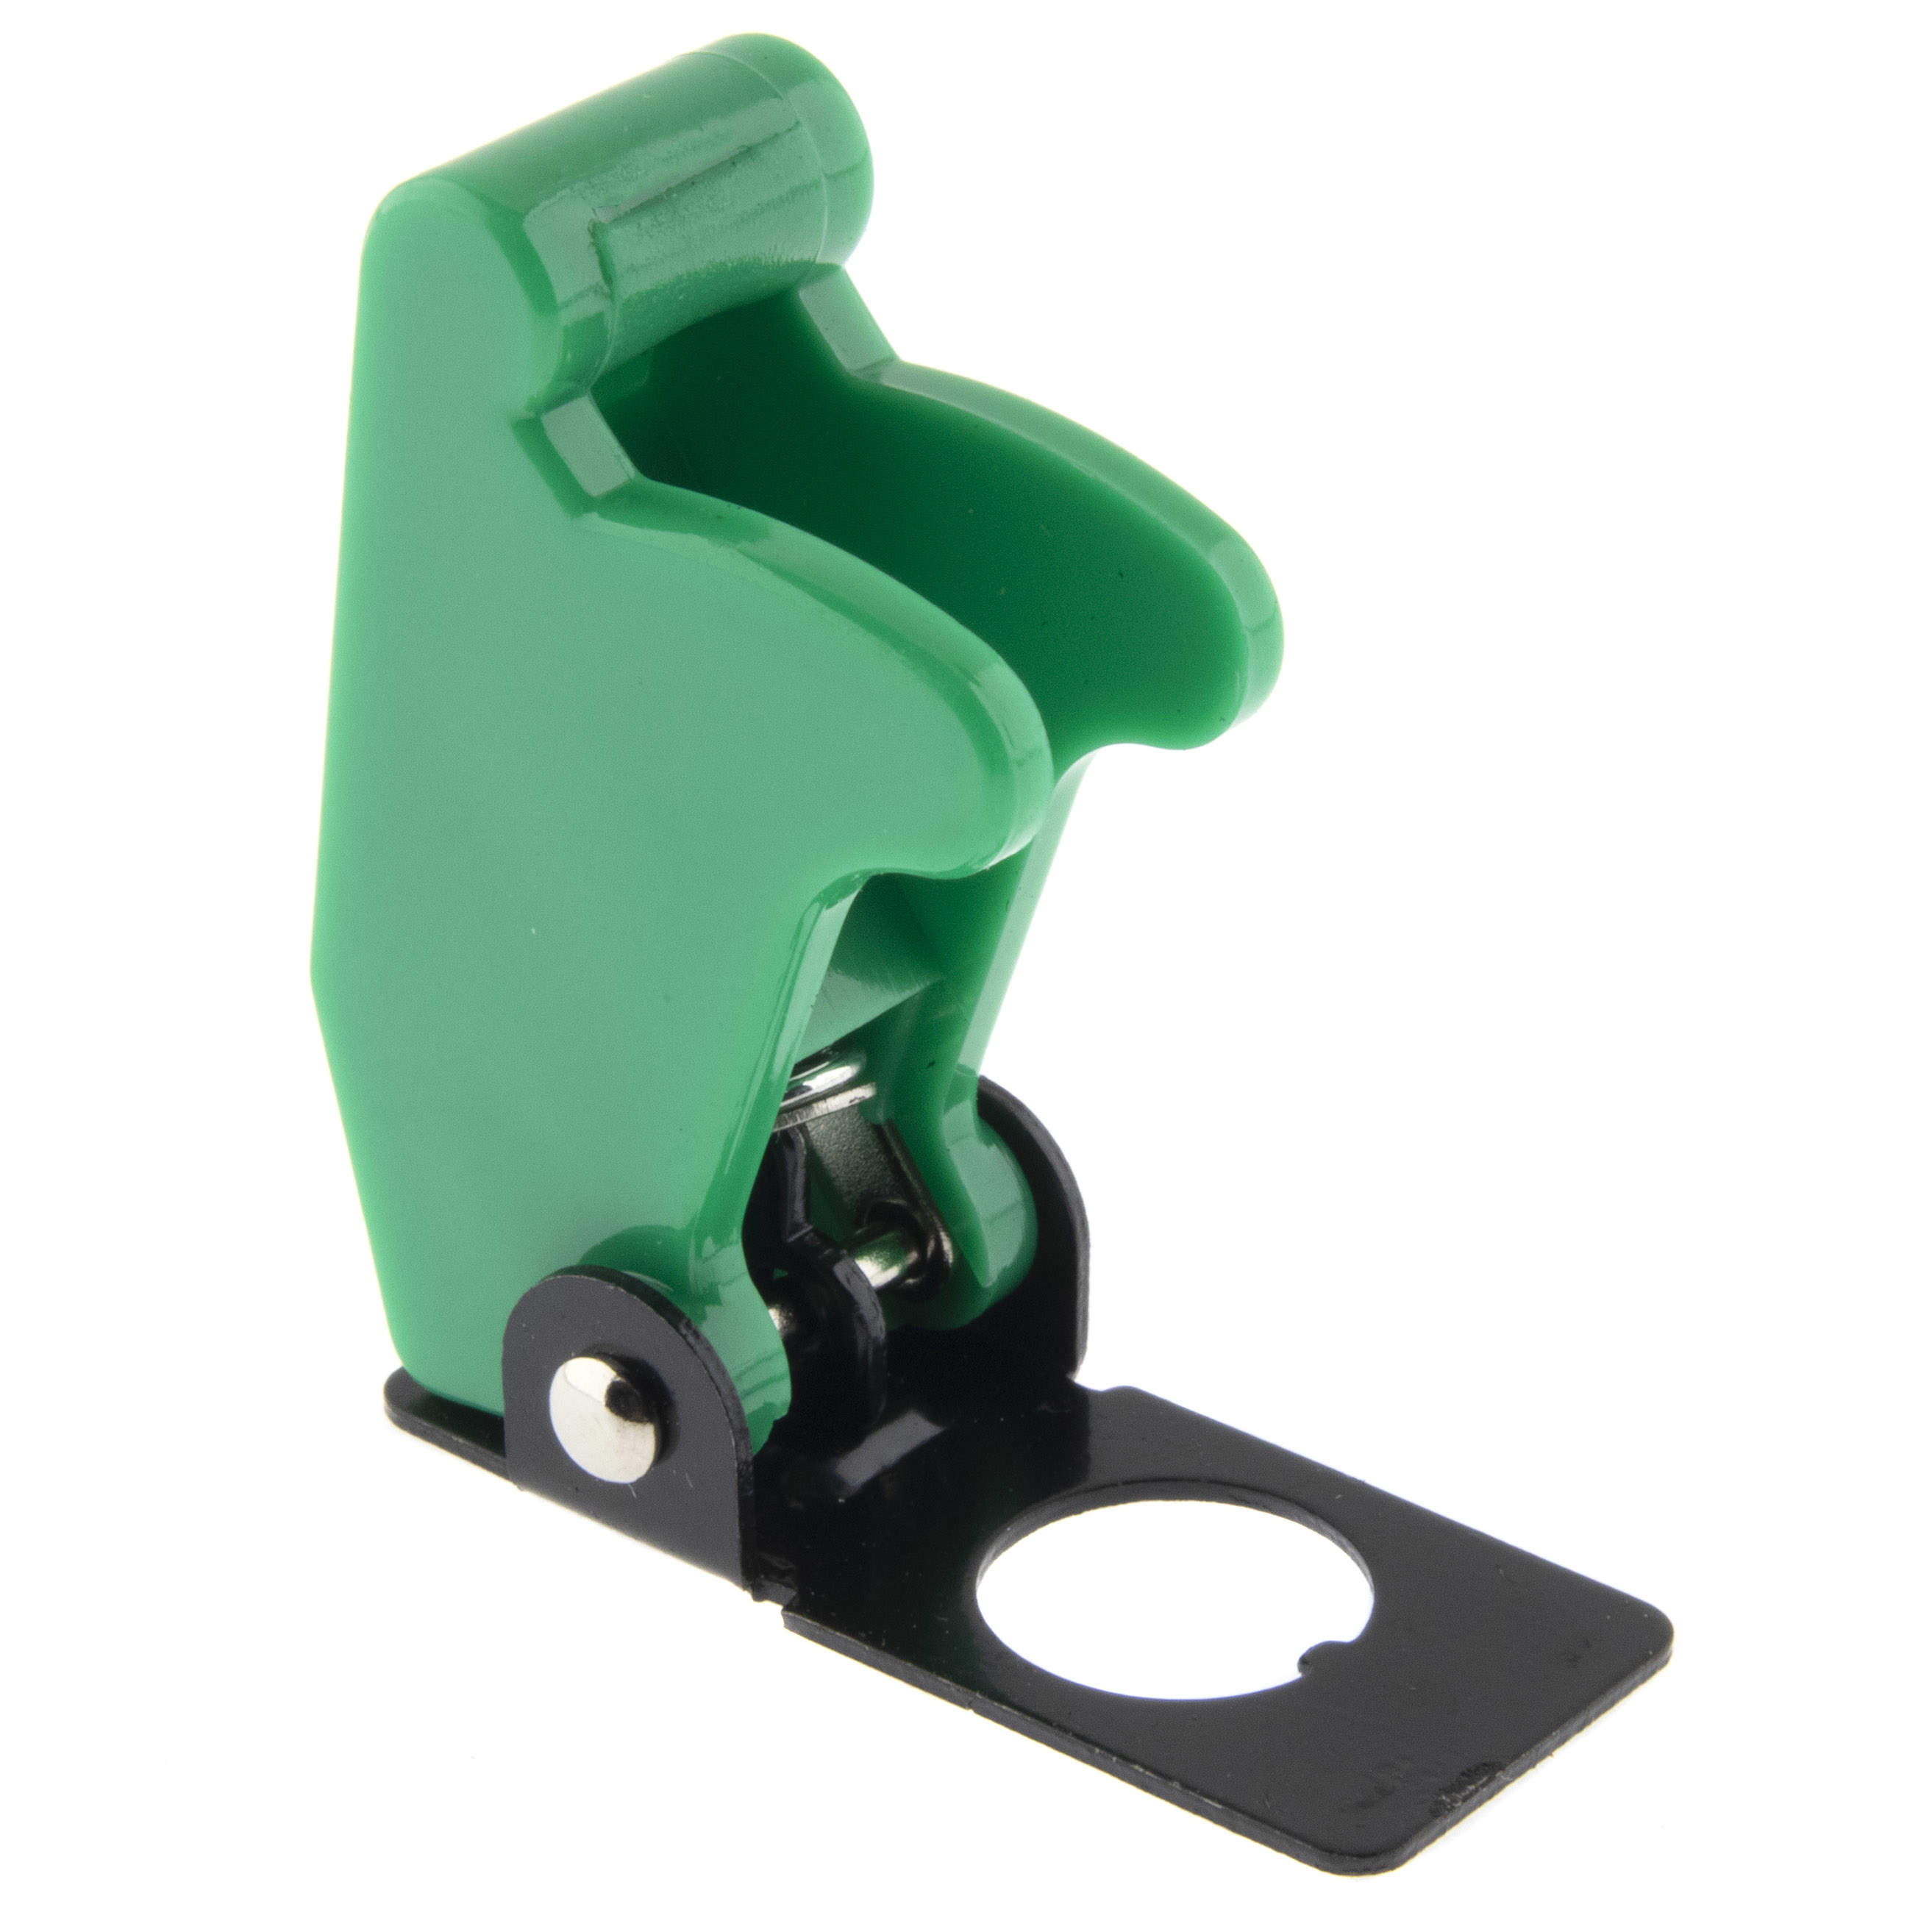 Flip-Cover for toggle switch -green